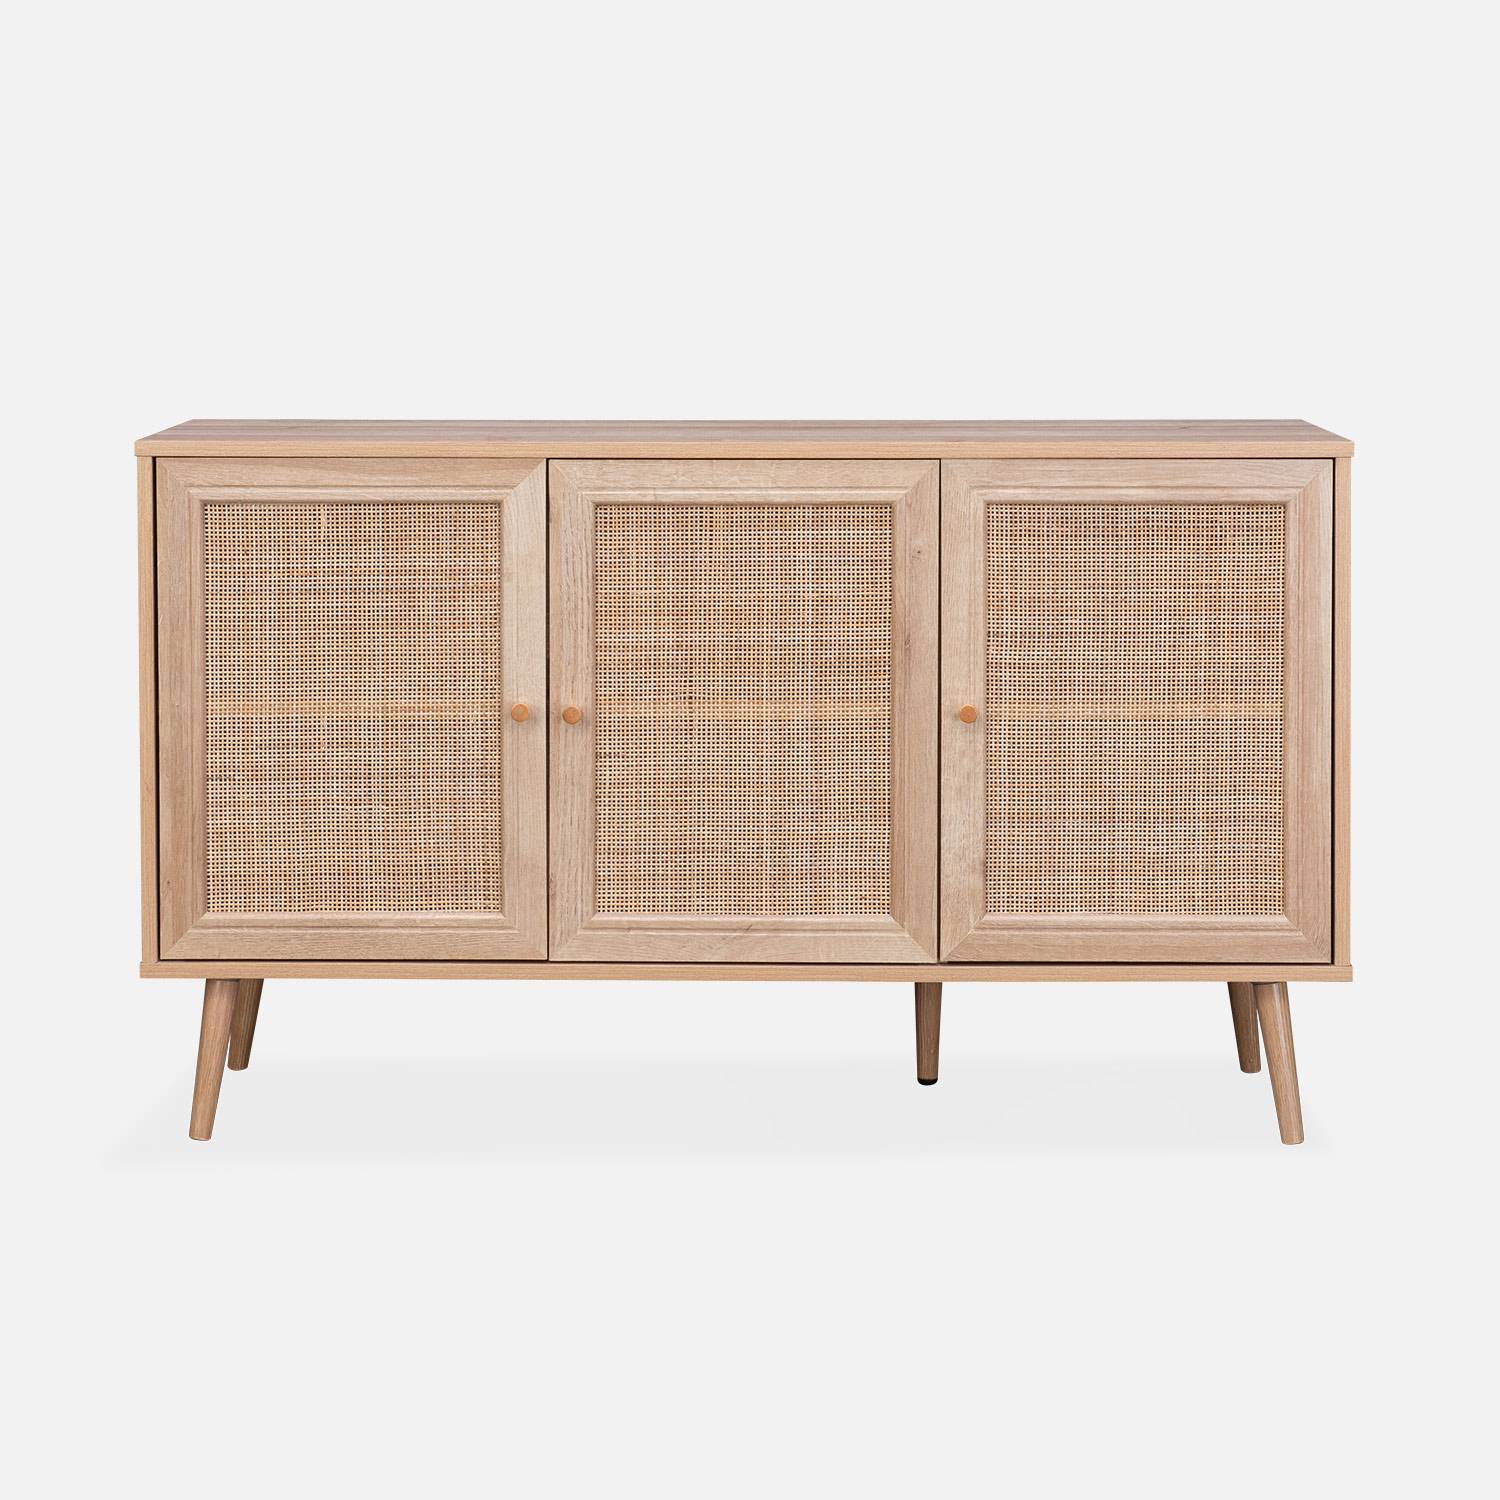 Wooden and cane rattan detail sideboard with 3 doors, 2 shelves, Scandi-style legs, 120x39x70cm - Boheme - Natural wood colour,sweeek,Photo4